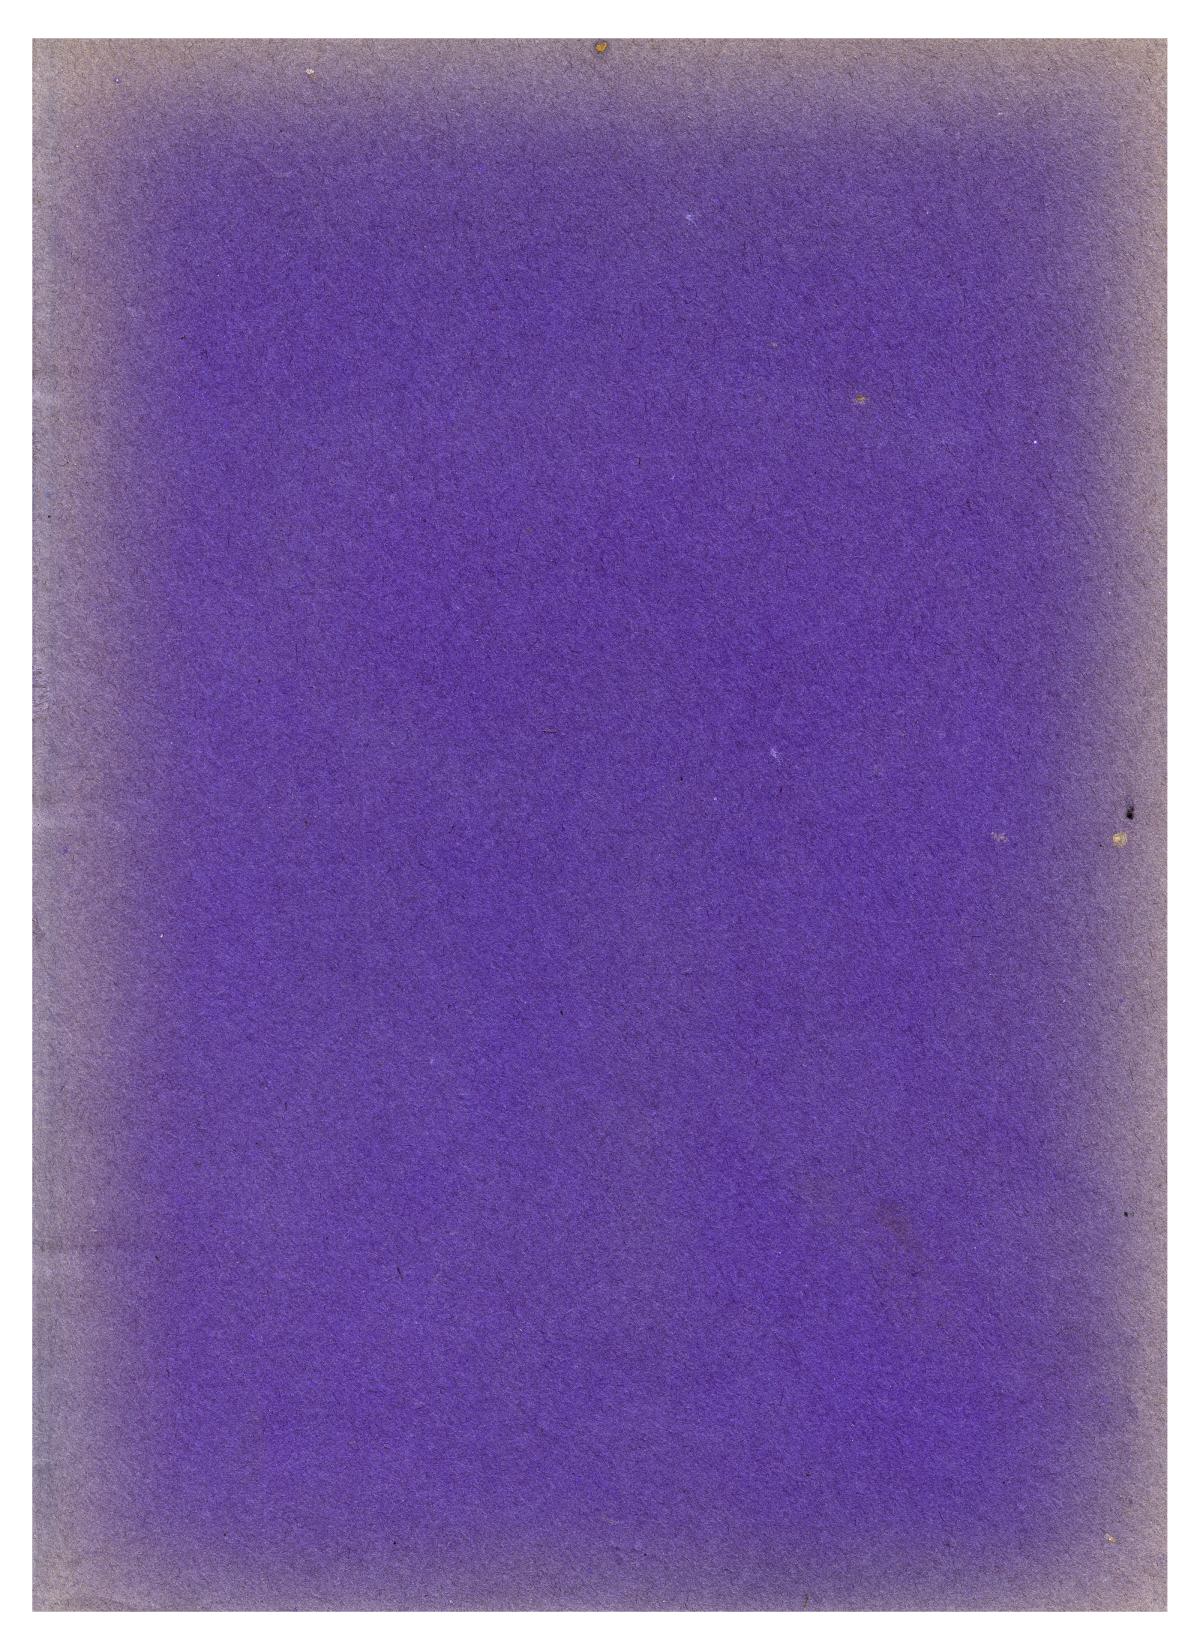 Prickly Pear, Yearbook of Abilene Christian College, 1921
                                                
                                                    Front Inside
                                                